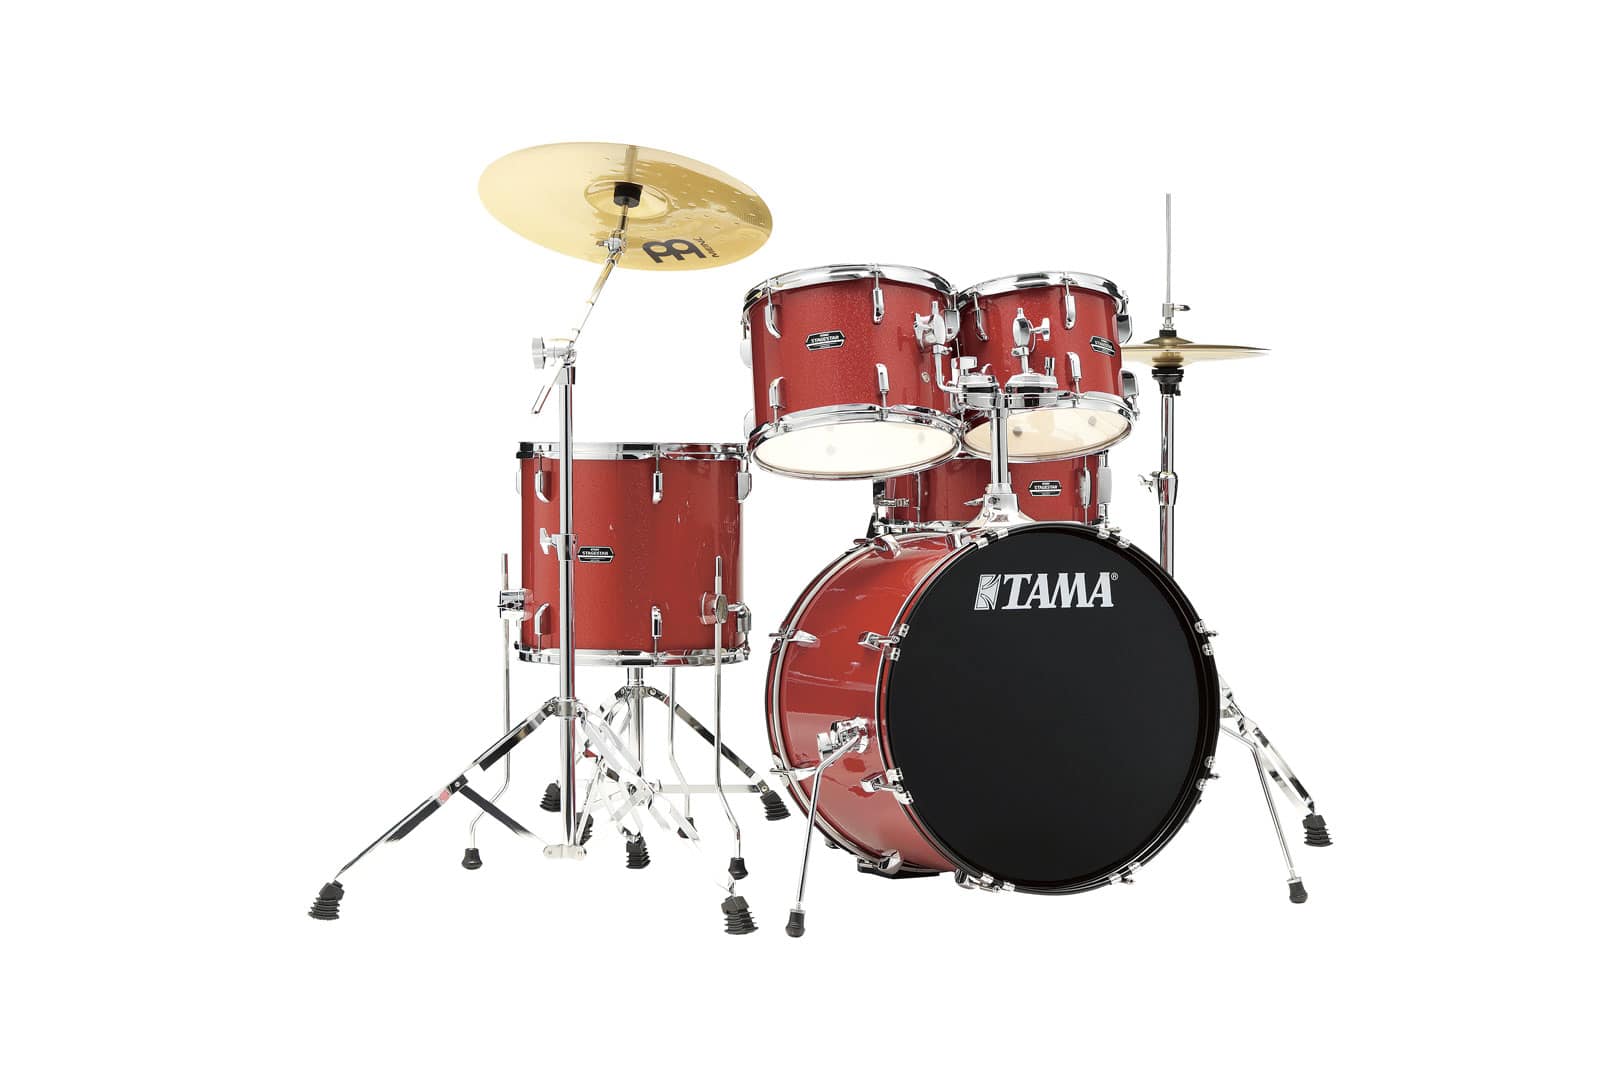 TAMA STAGESTAR FUSION 20 - CANDY RED SPARKLE 